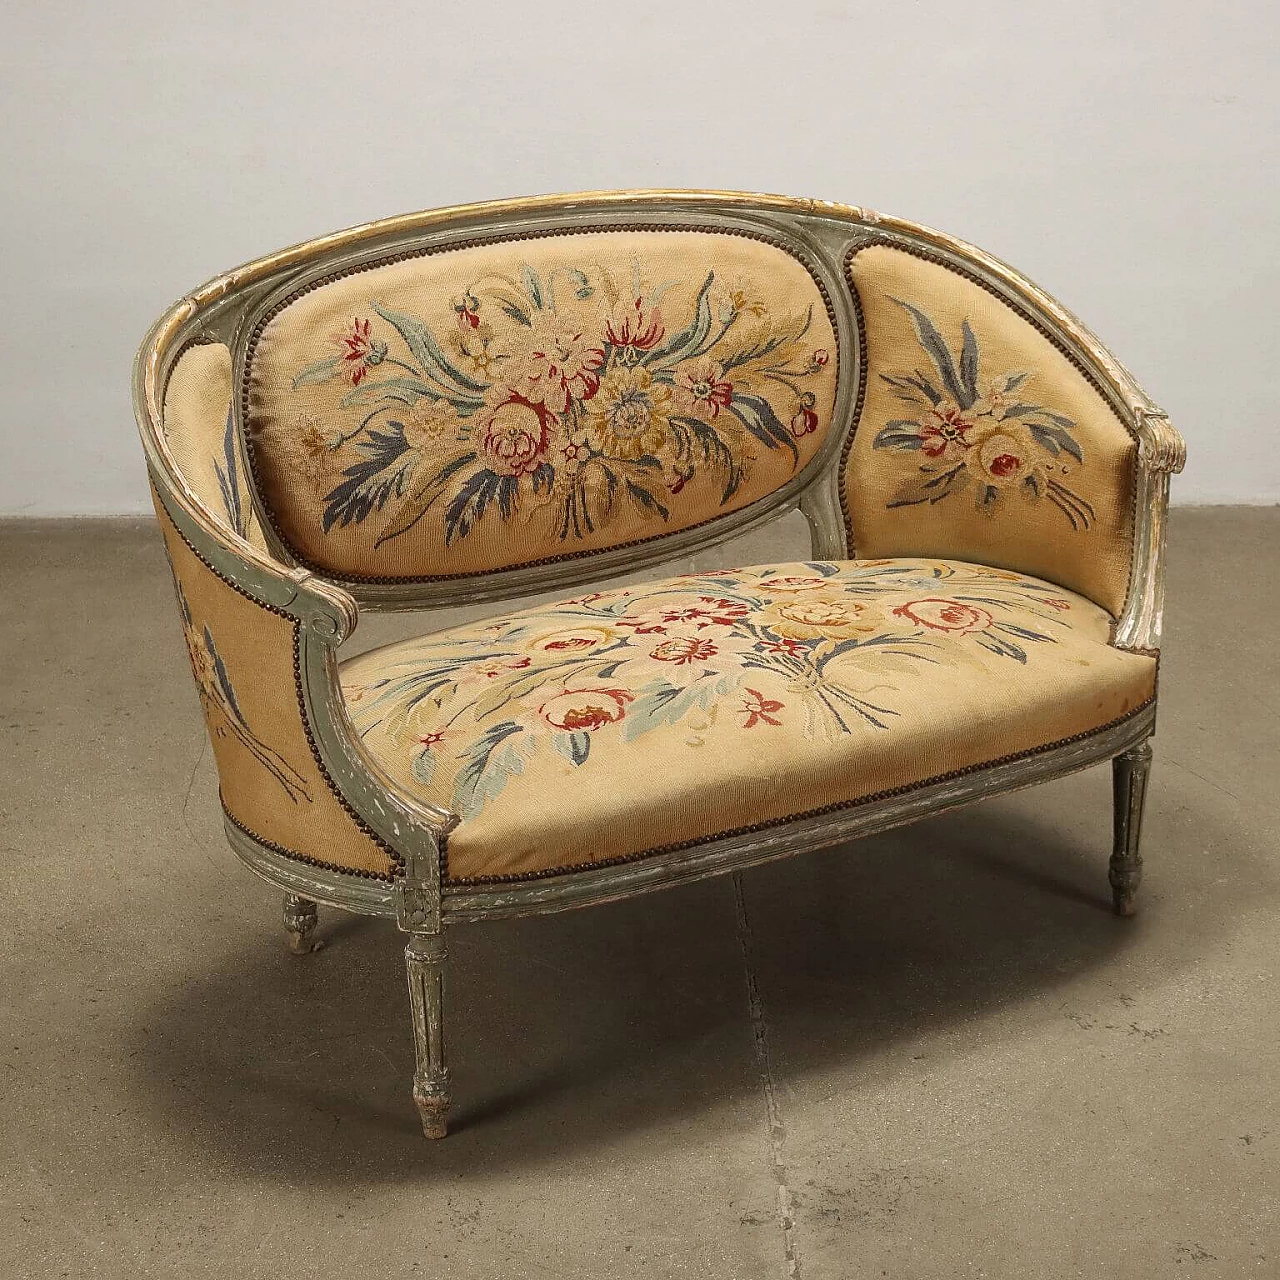 4 Neoclassical style lacquered and gilded wood armchairs and sofa, early 20th century 3